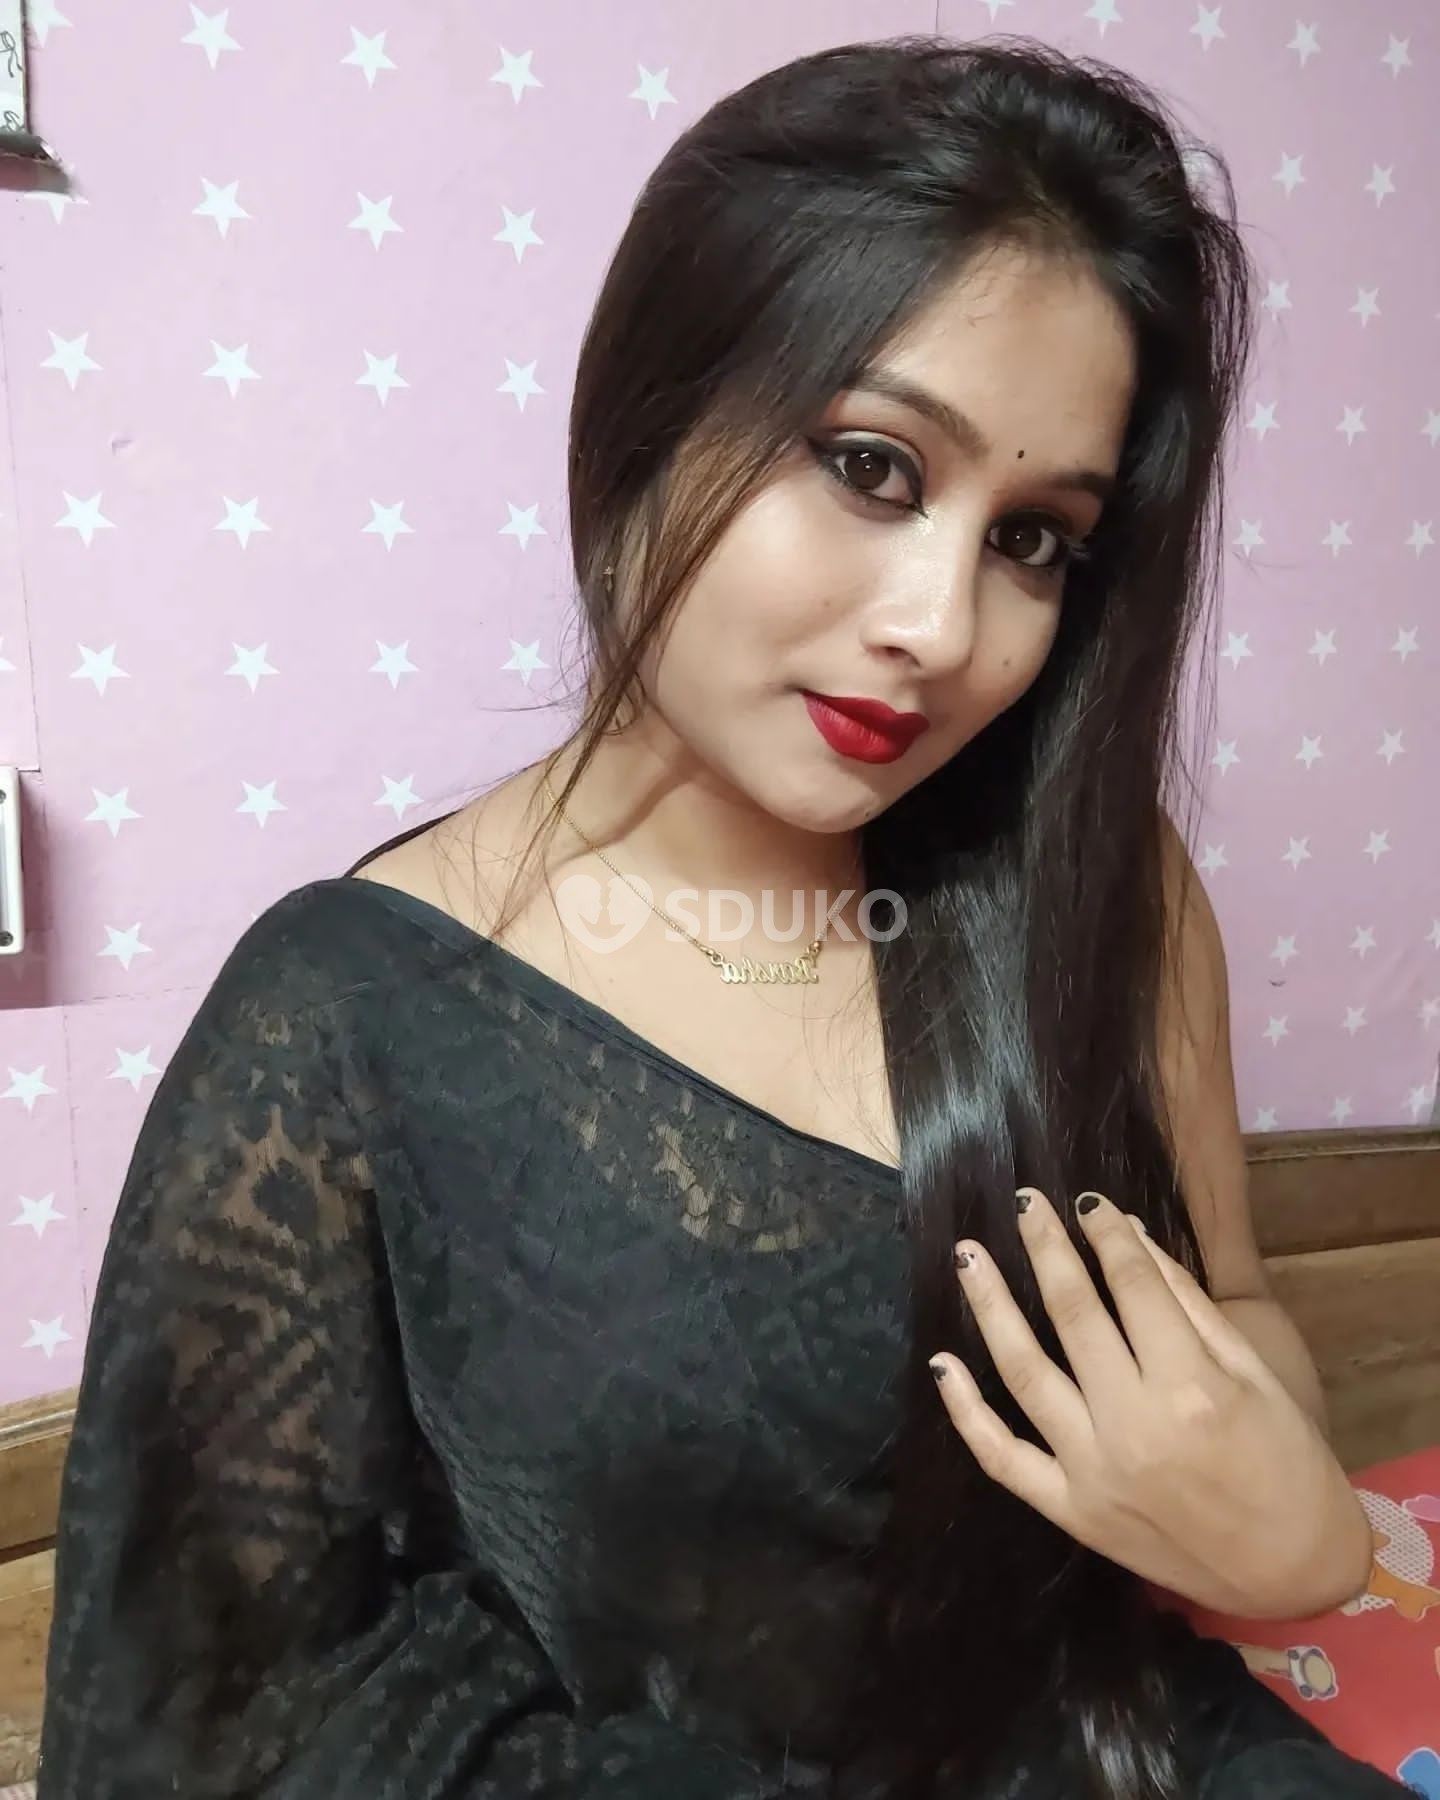 RANCHI INDEPENDENT COLLEGE GIRLS HOUSEWIFE ANYTIME CALL ME 24/7 AVAILABLE ANYTIME CALL ME